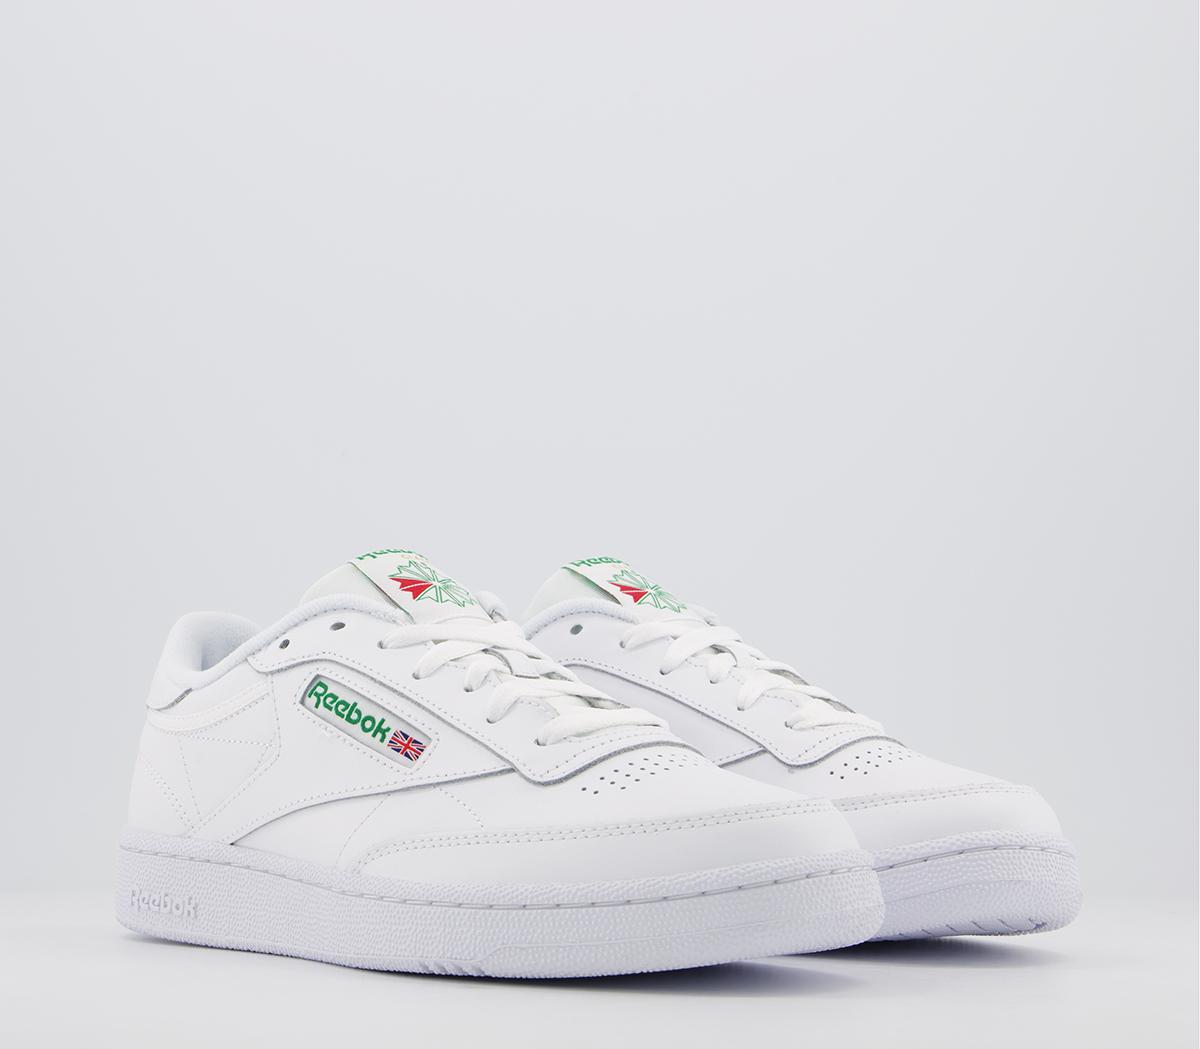 Reebok Club C 85 In White And Green, 4